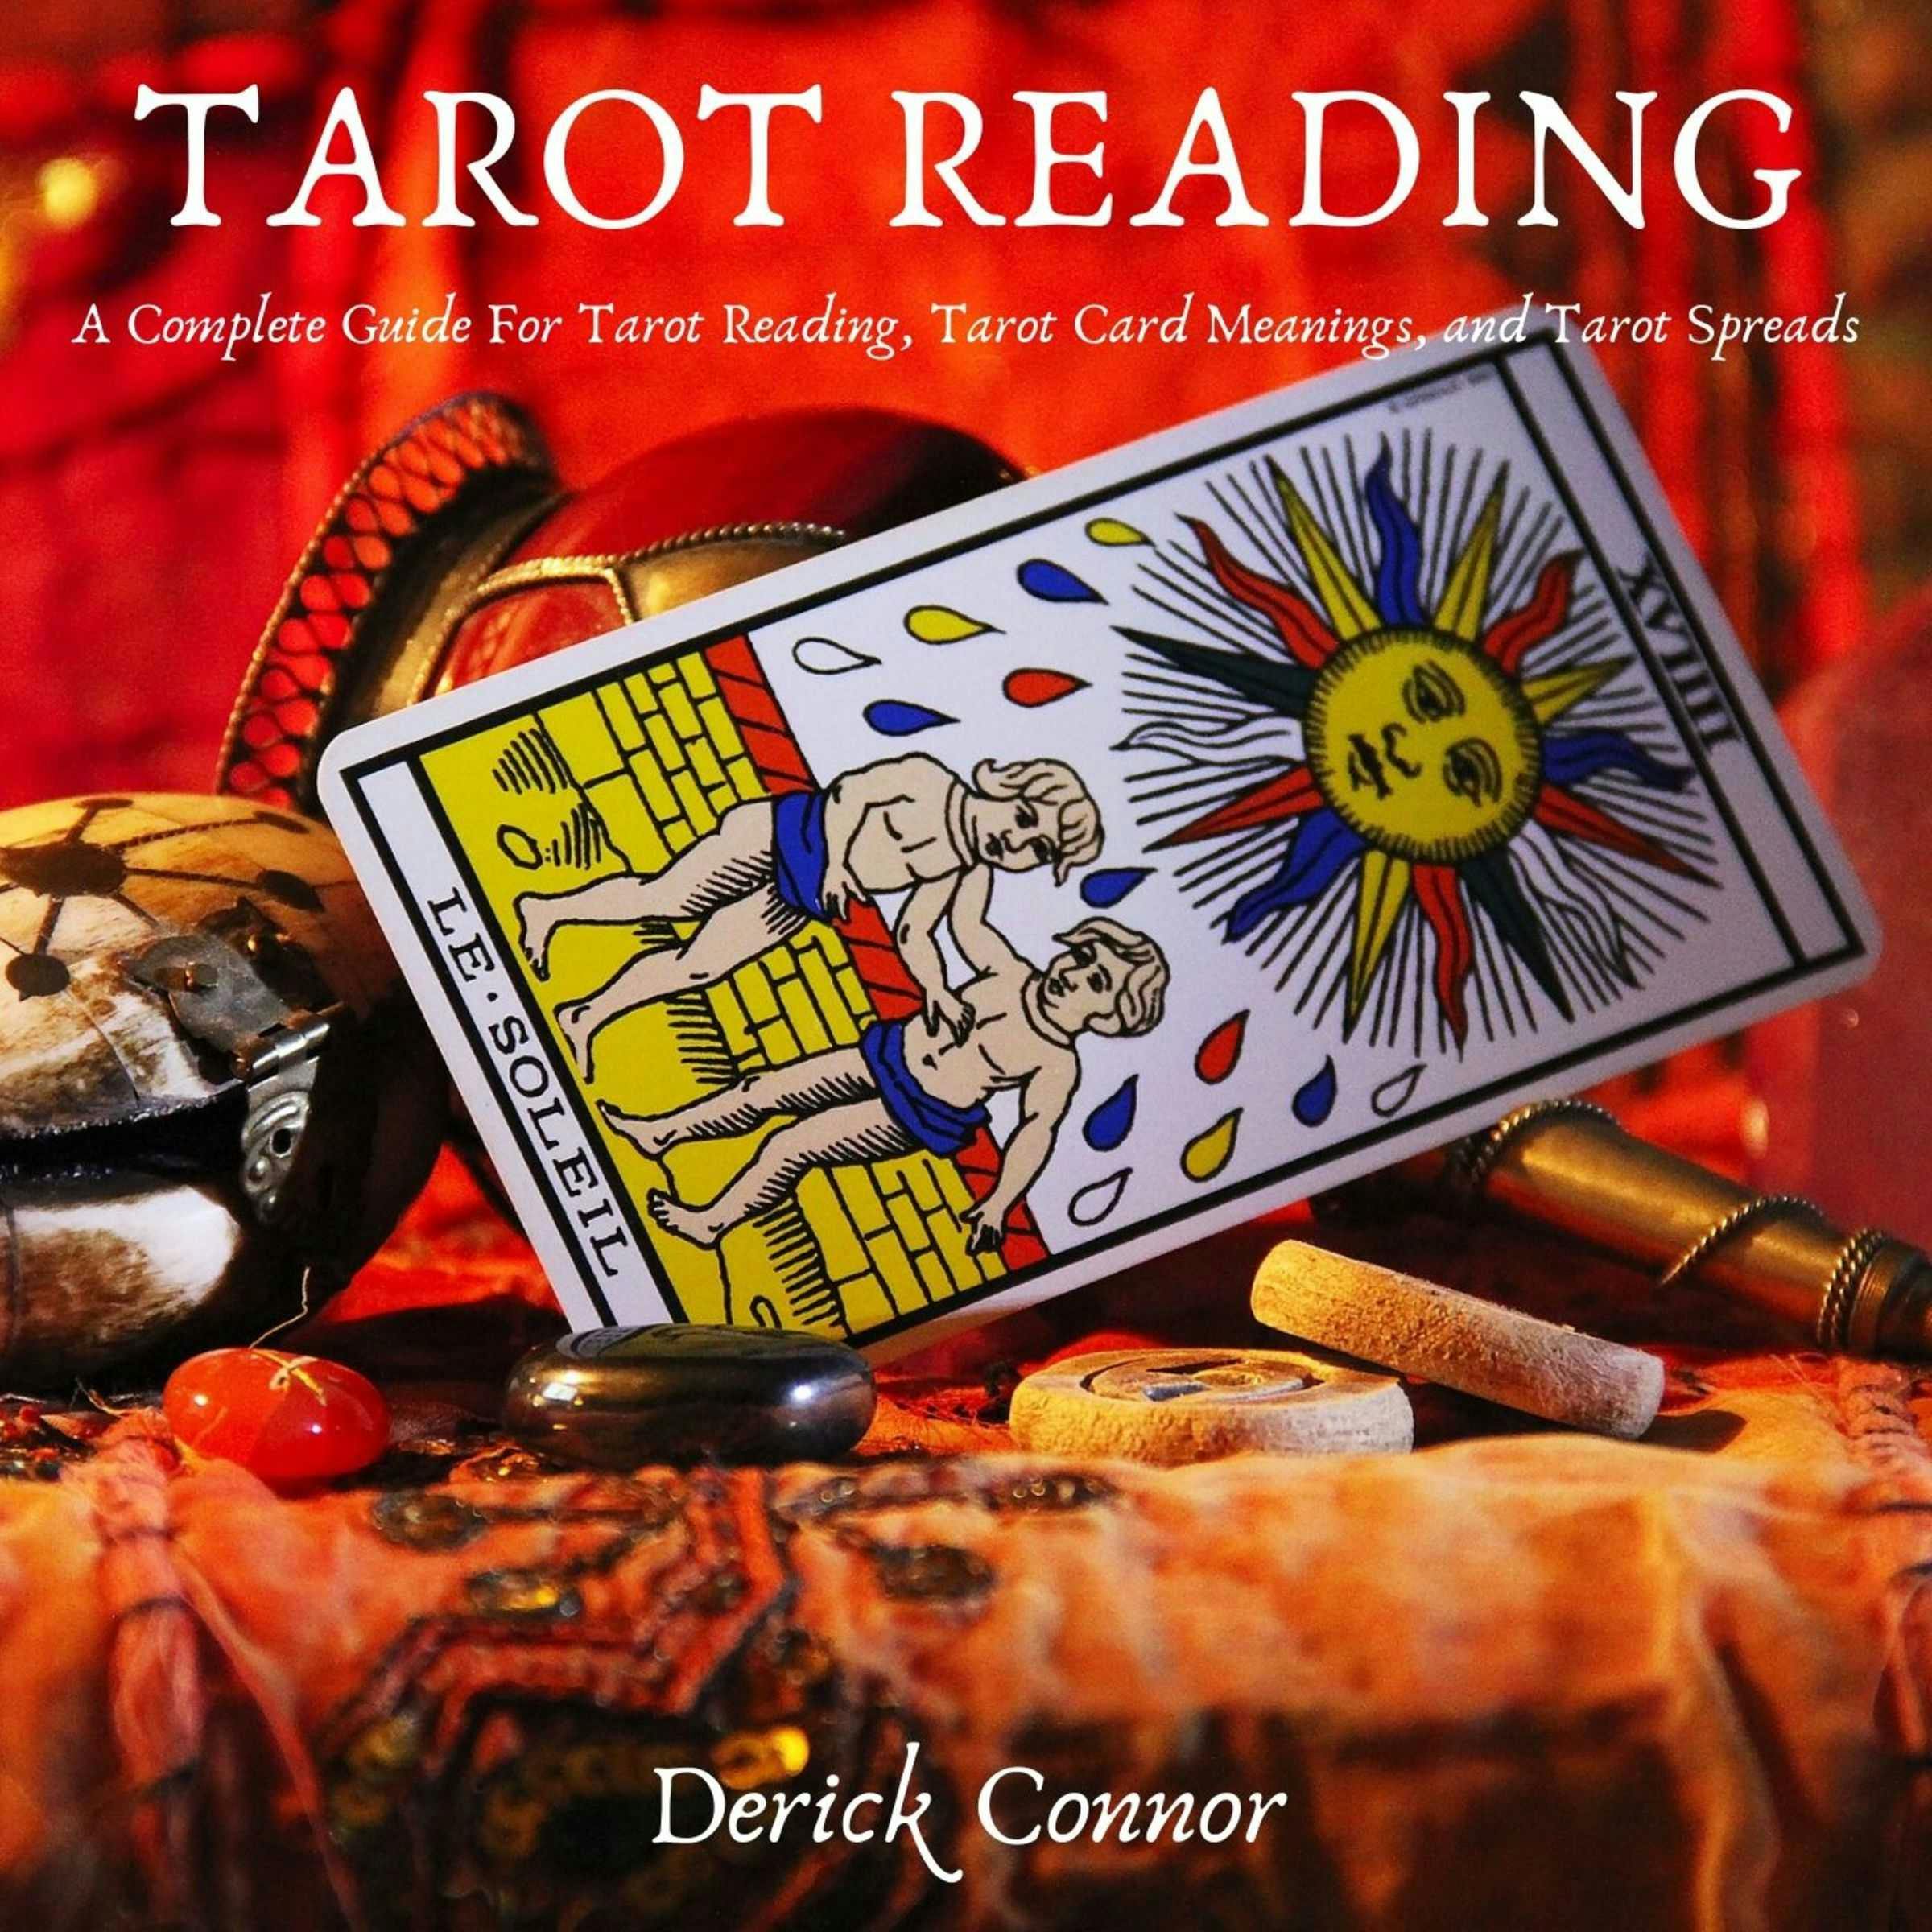 Tarot Reading: A Complete Guide For Tarot Reading, Tarot Card Meanings, and Tarot Spreads - undefined